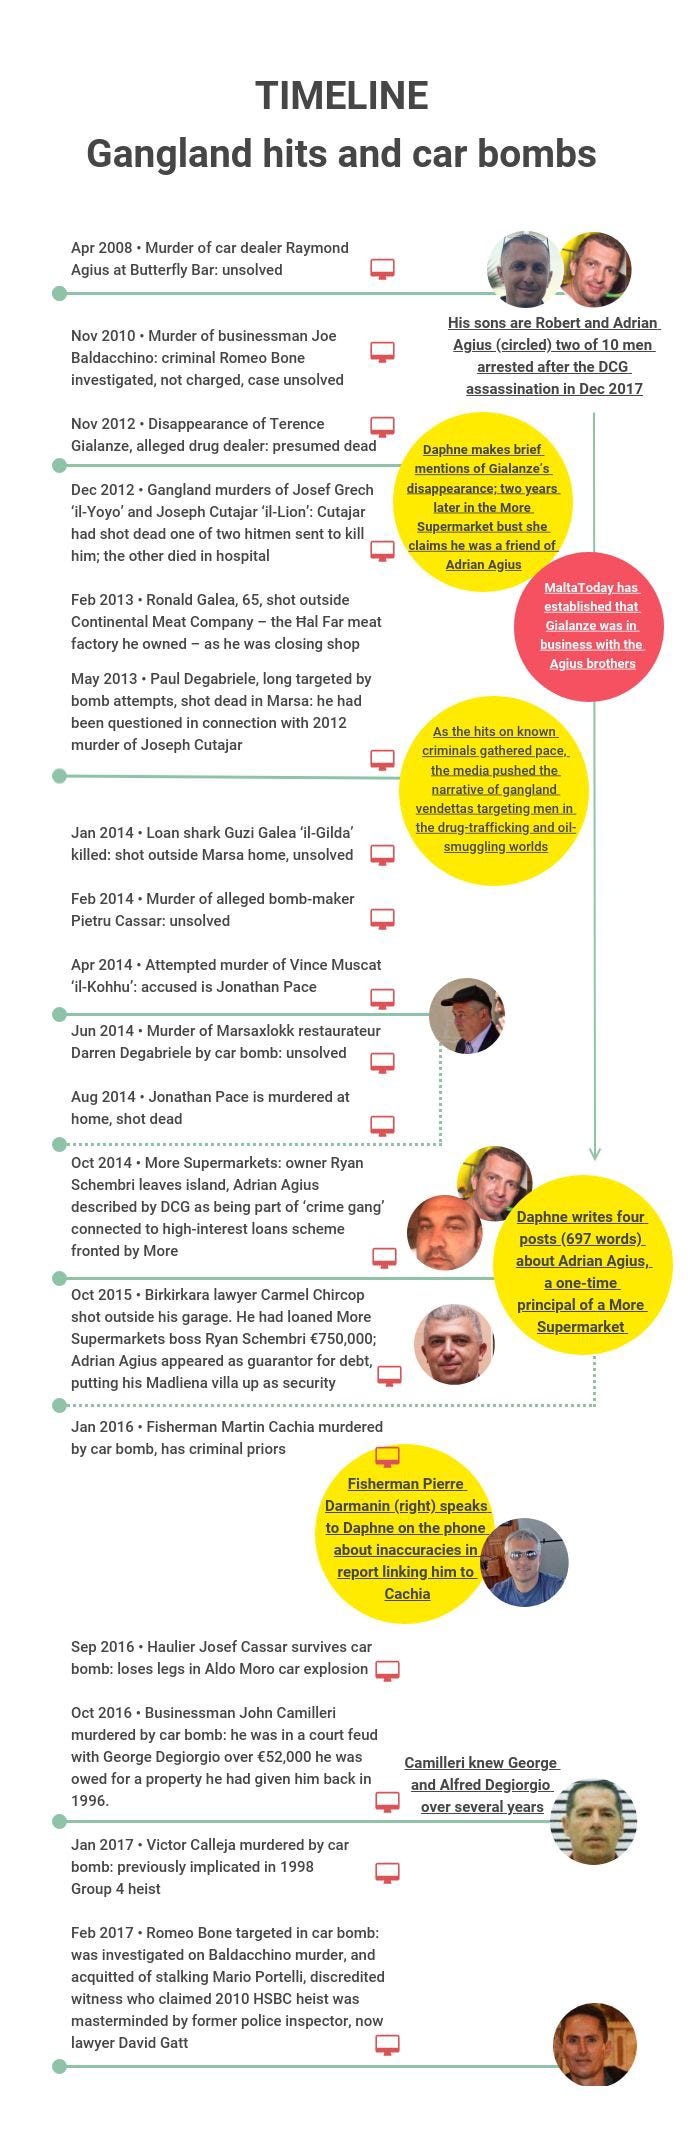 Timeline of Maltese gangland murders and references to Agius brothers (Maksar) by Daphne Caruana Galizia and More Supermarket